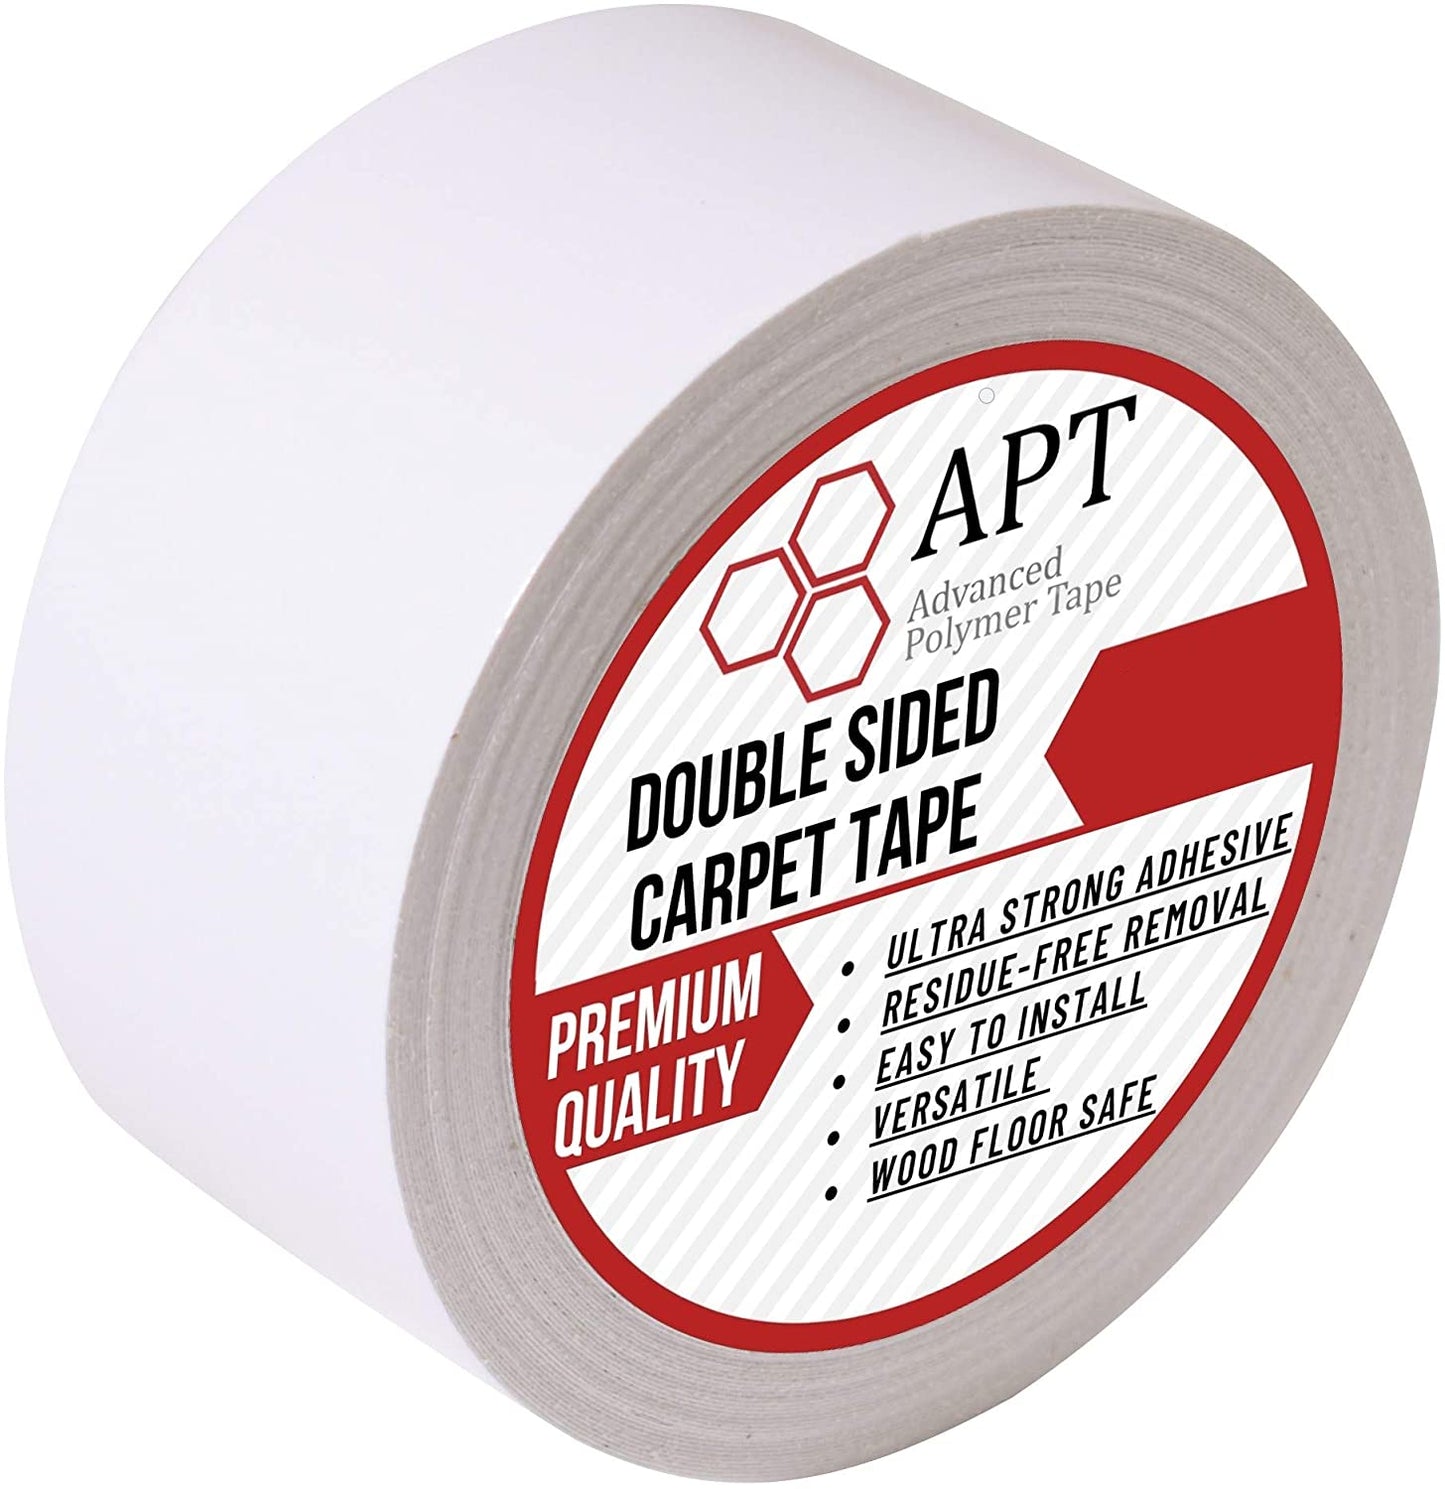 Intertape Polymer 9970/597 Carpet Tape Double Sided 1.88 Inch By 36 Yard:  Carpet Tape (077922761968-1)